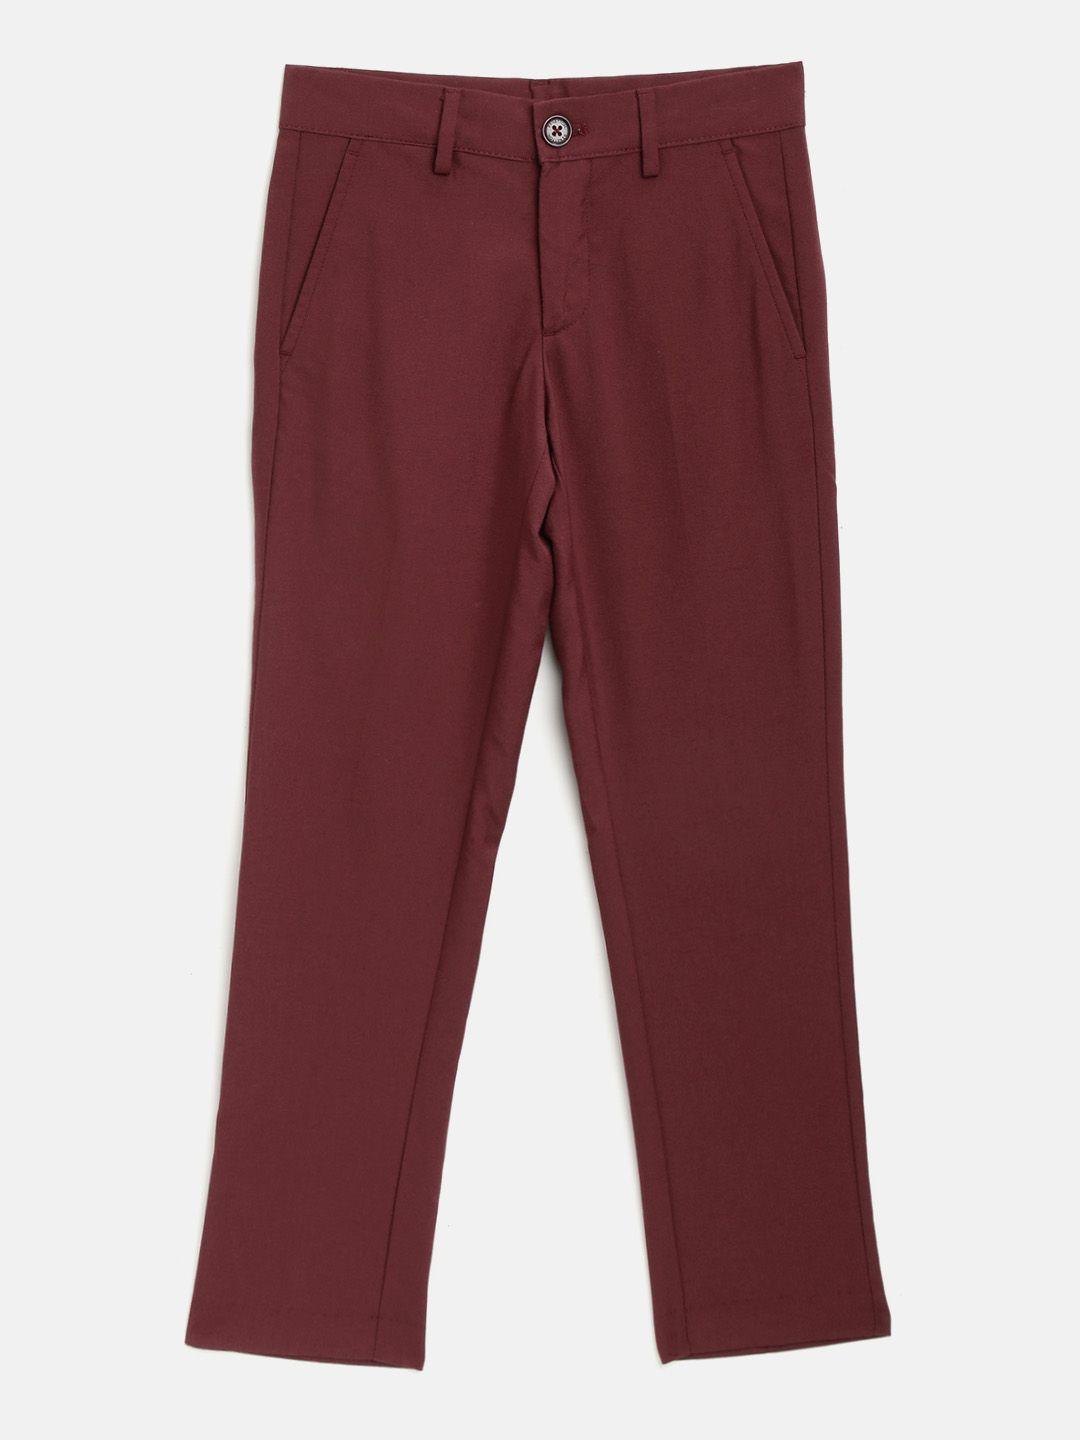 united-colors-of-benetton-boys-maroon-regular-fit-solid-trousers